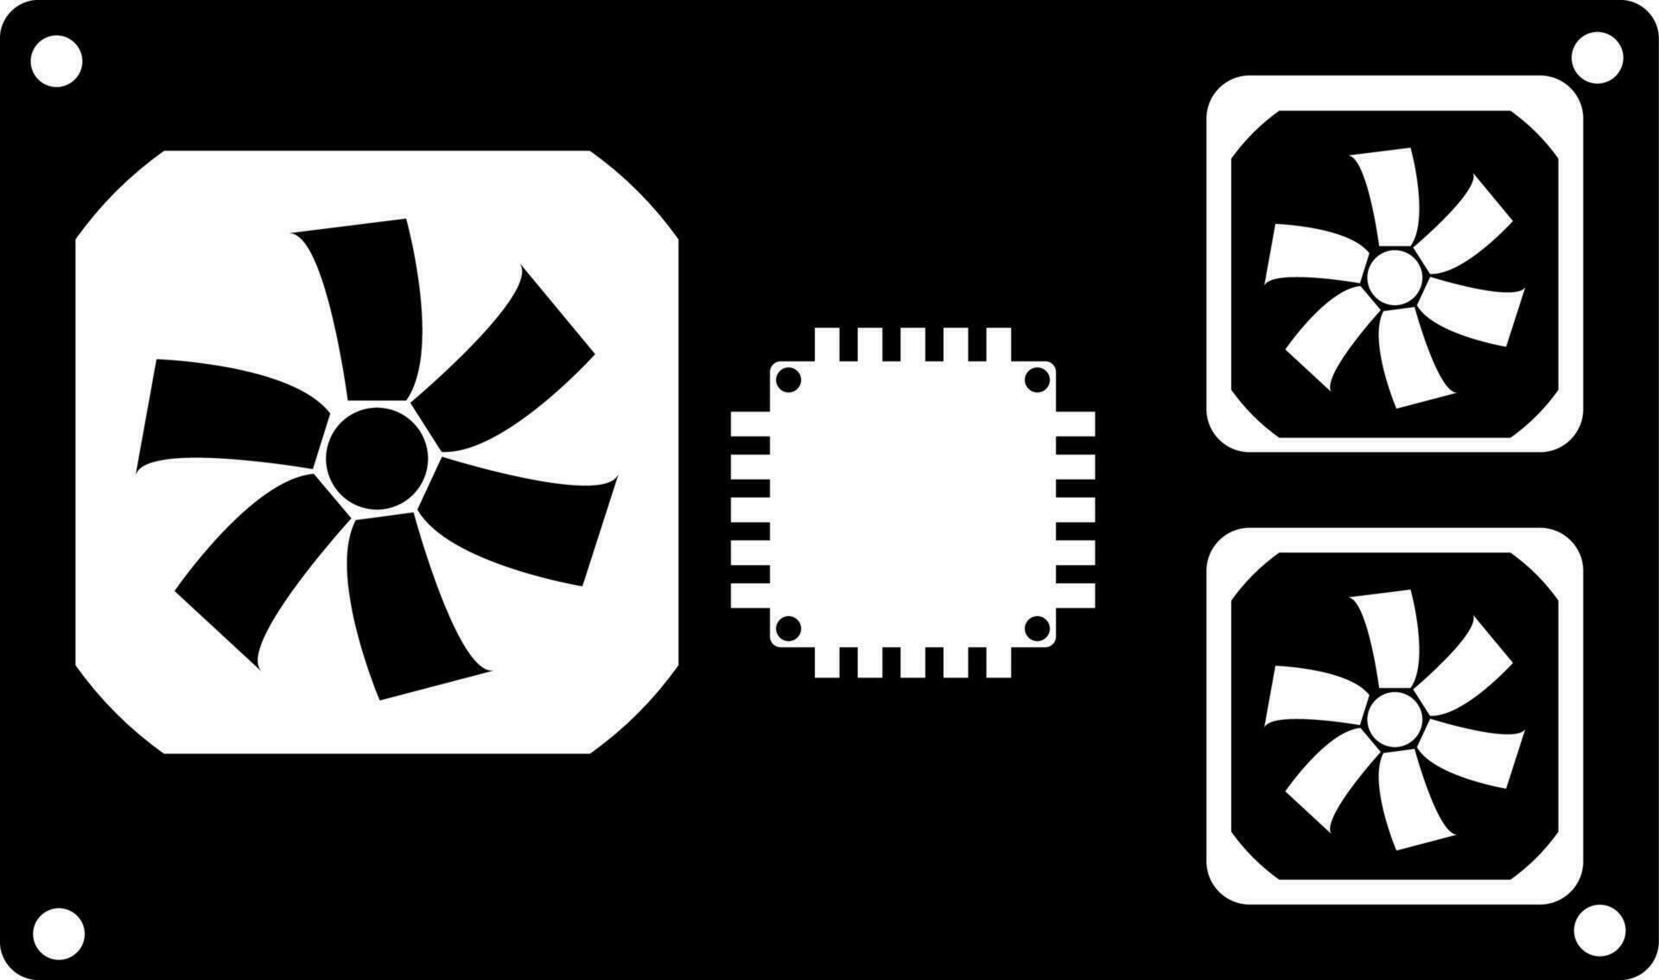 Cooling fan in flat style illustration. vector